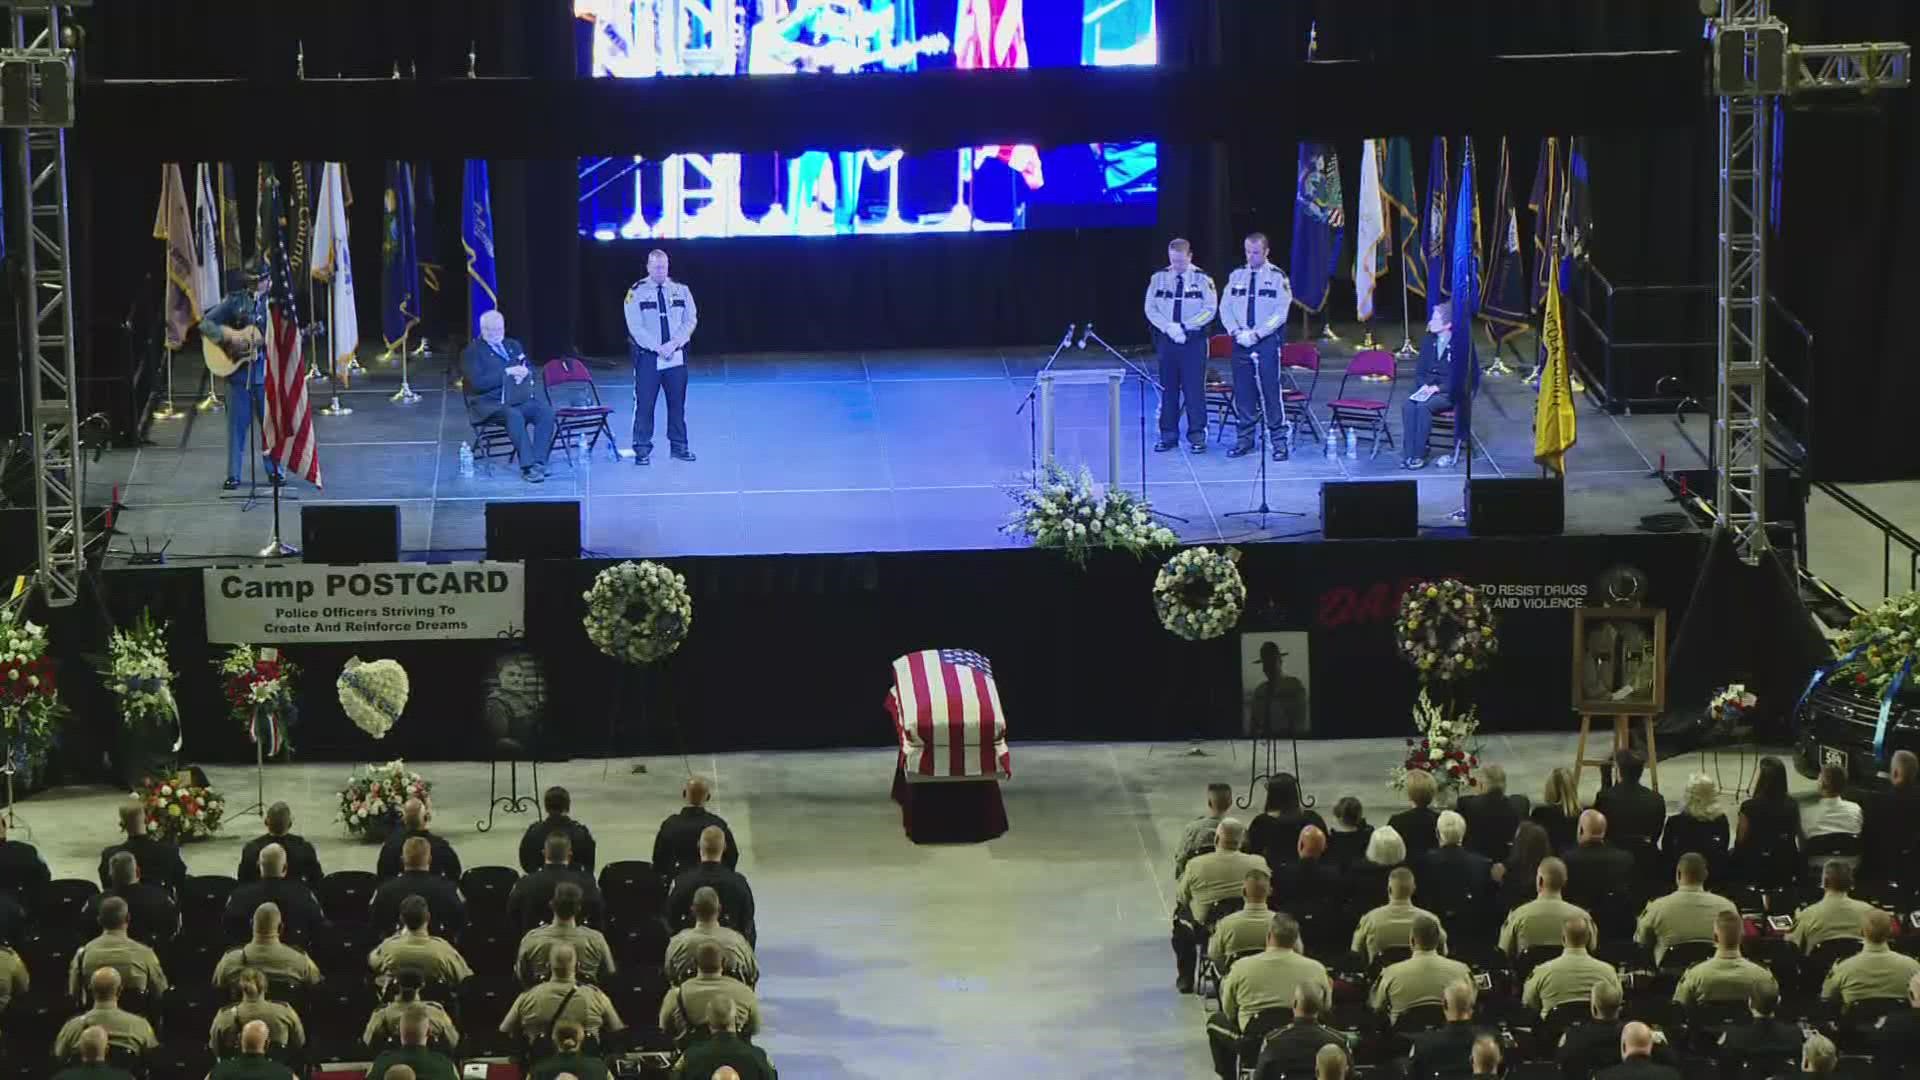 A funeral service to honor and remember Deputy Gross was held at the Cross Insurance Center in Bangor on Thursday.